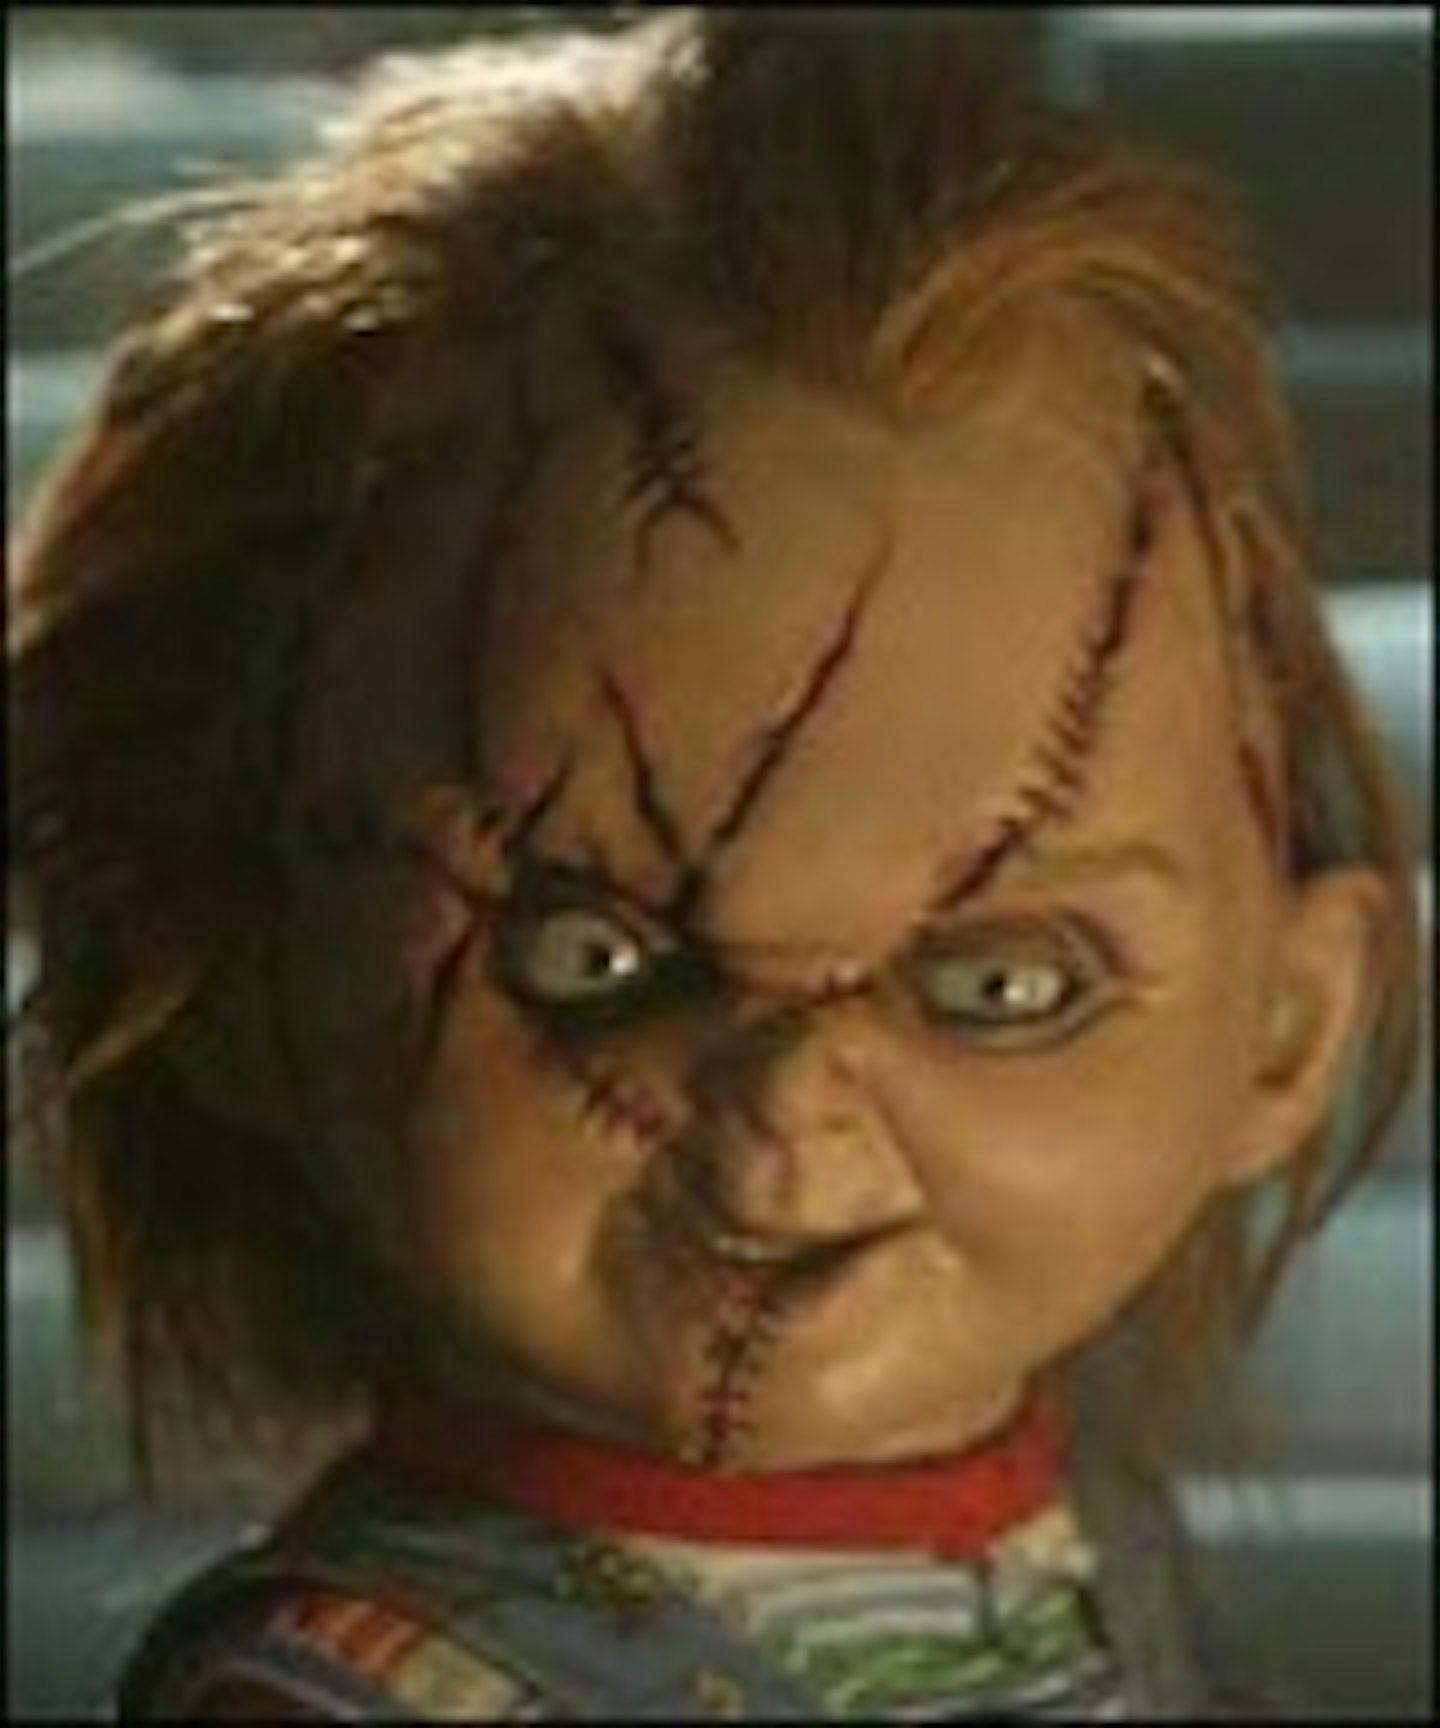 Child's Play To Be Remade?